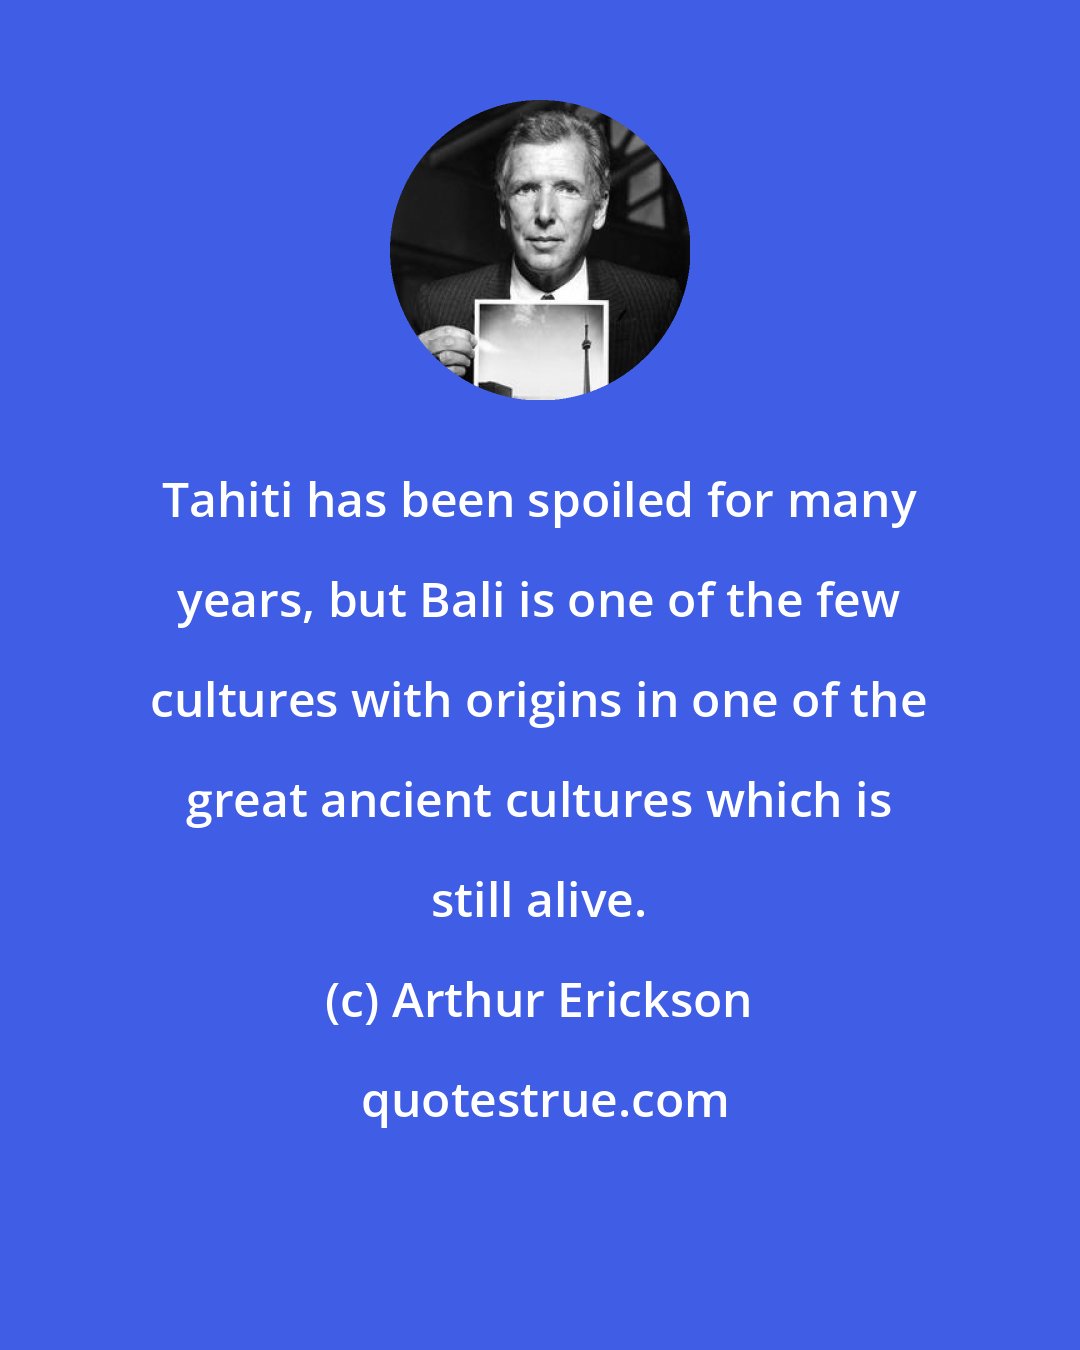 Arthur Erickson: Tahiti has been spoiled for many years, but Bali is one of the few cultures with origins in one of the great ancient cultures which is still alive.